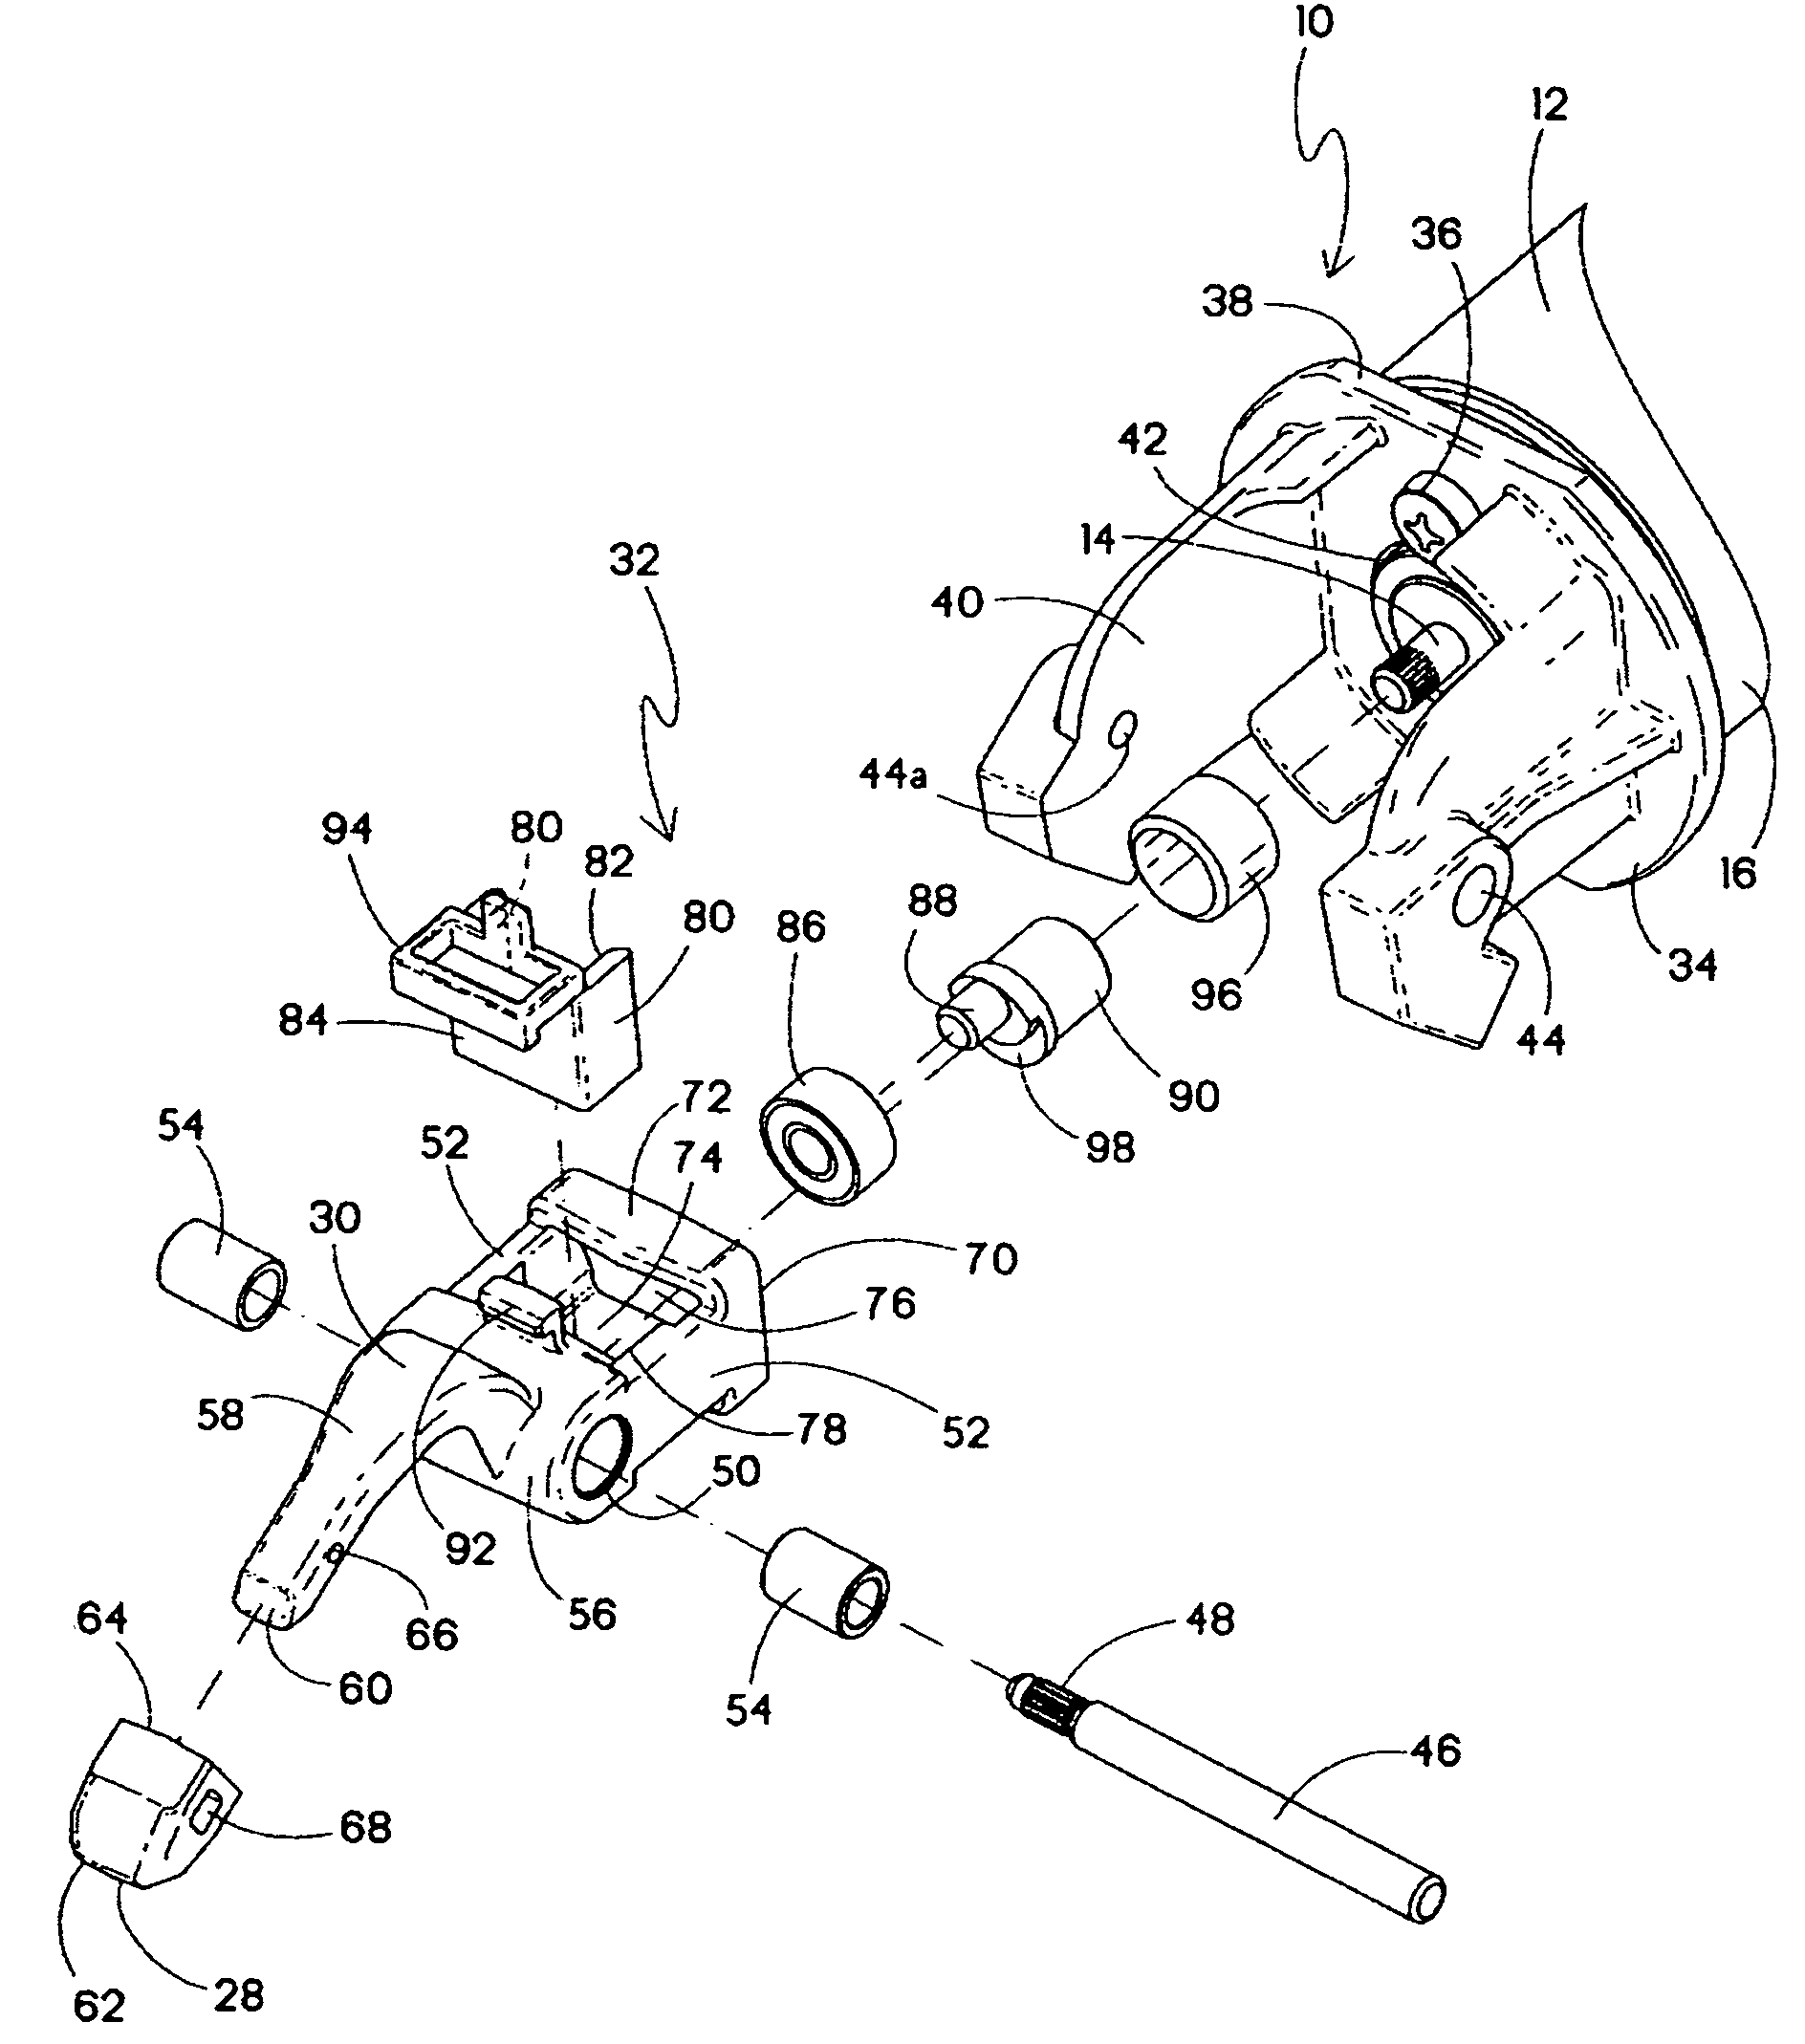 Rotary motor clipper with linear drive system